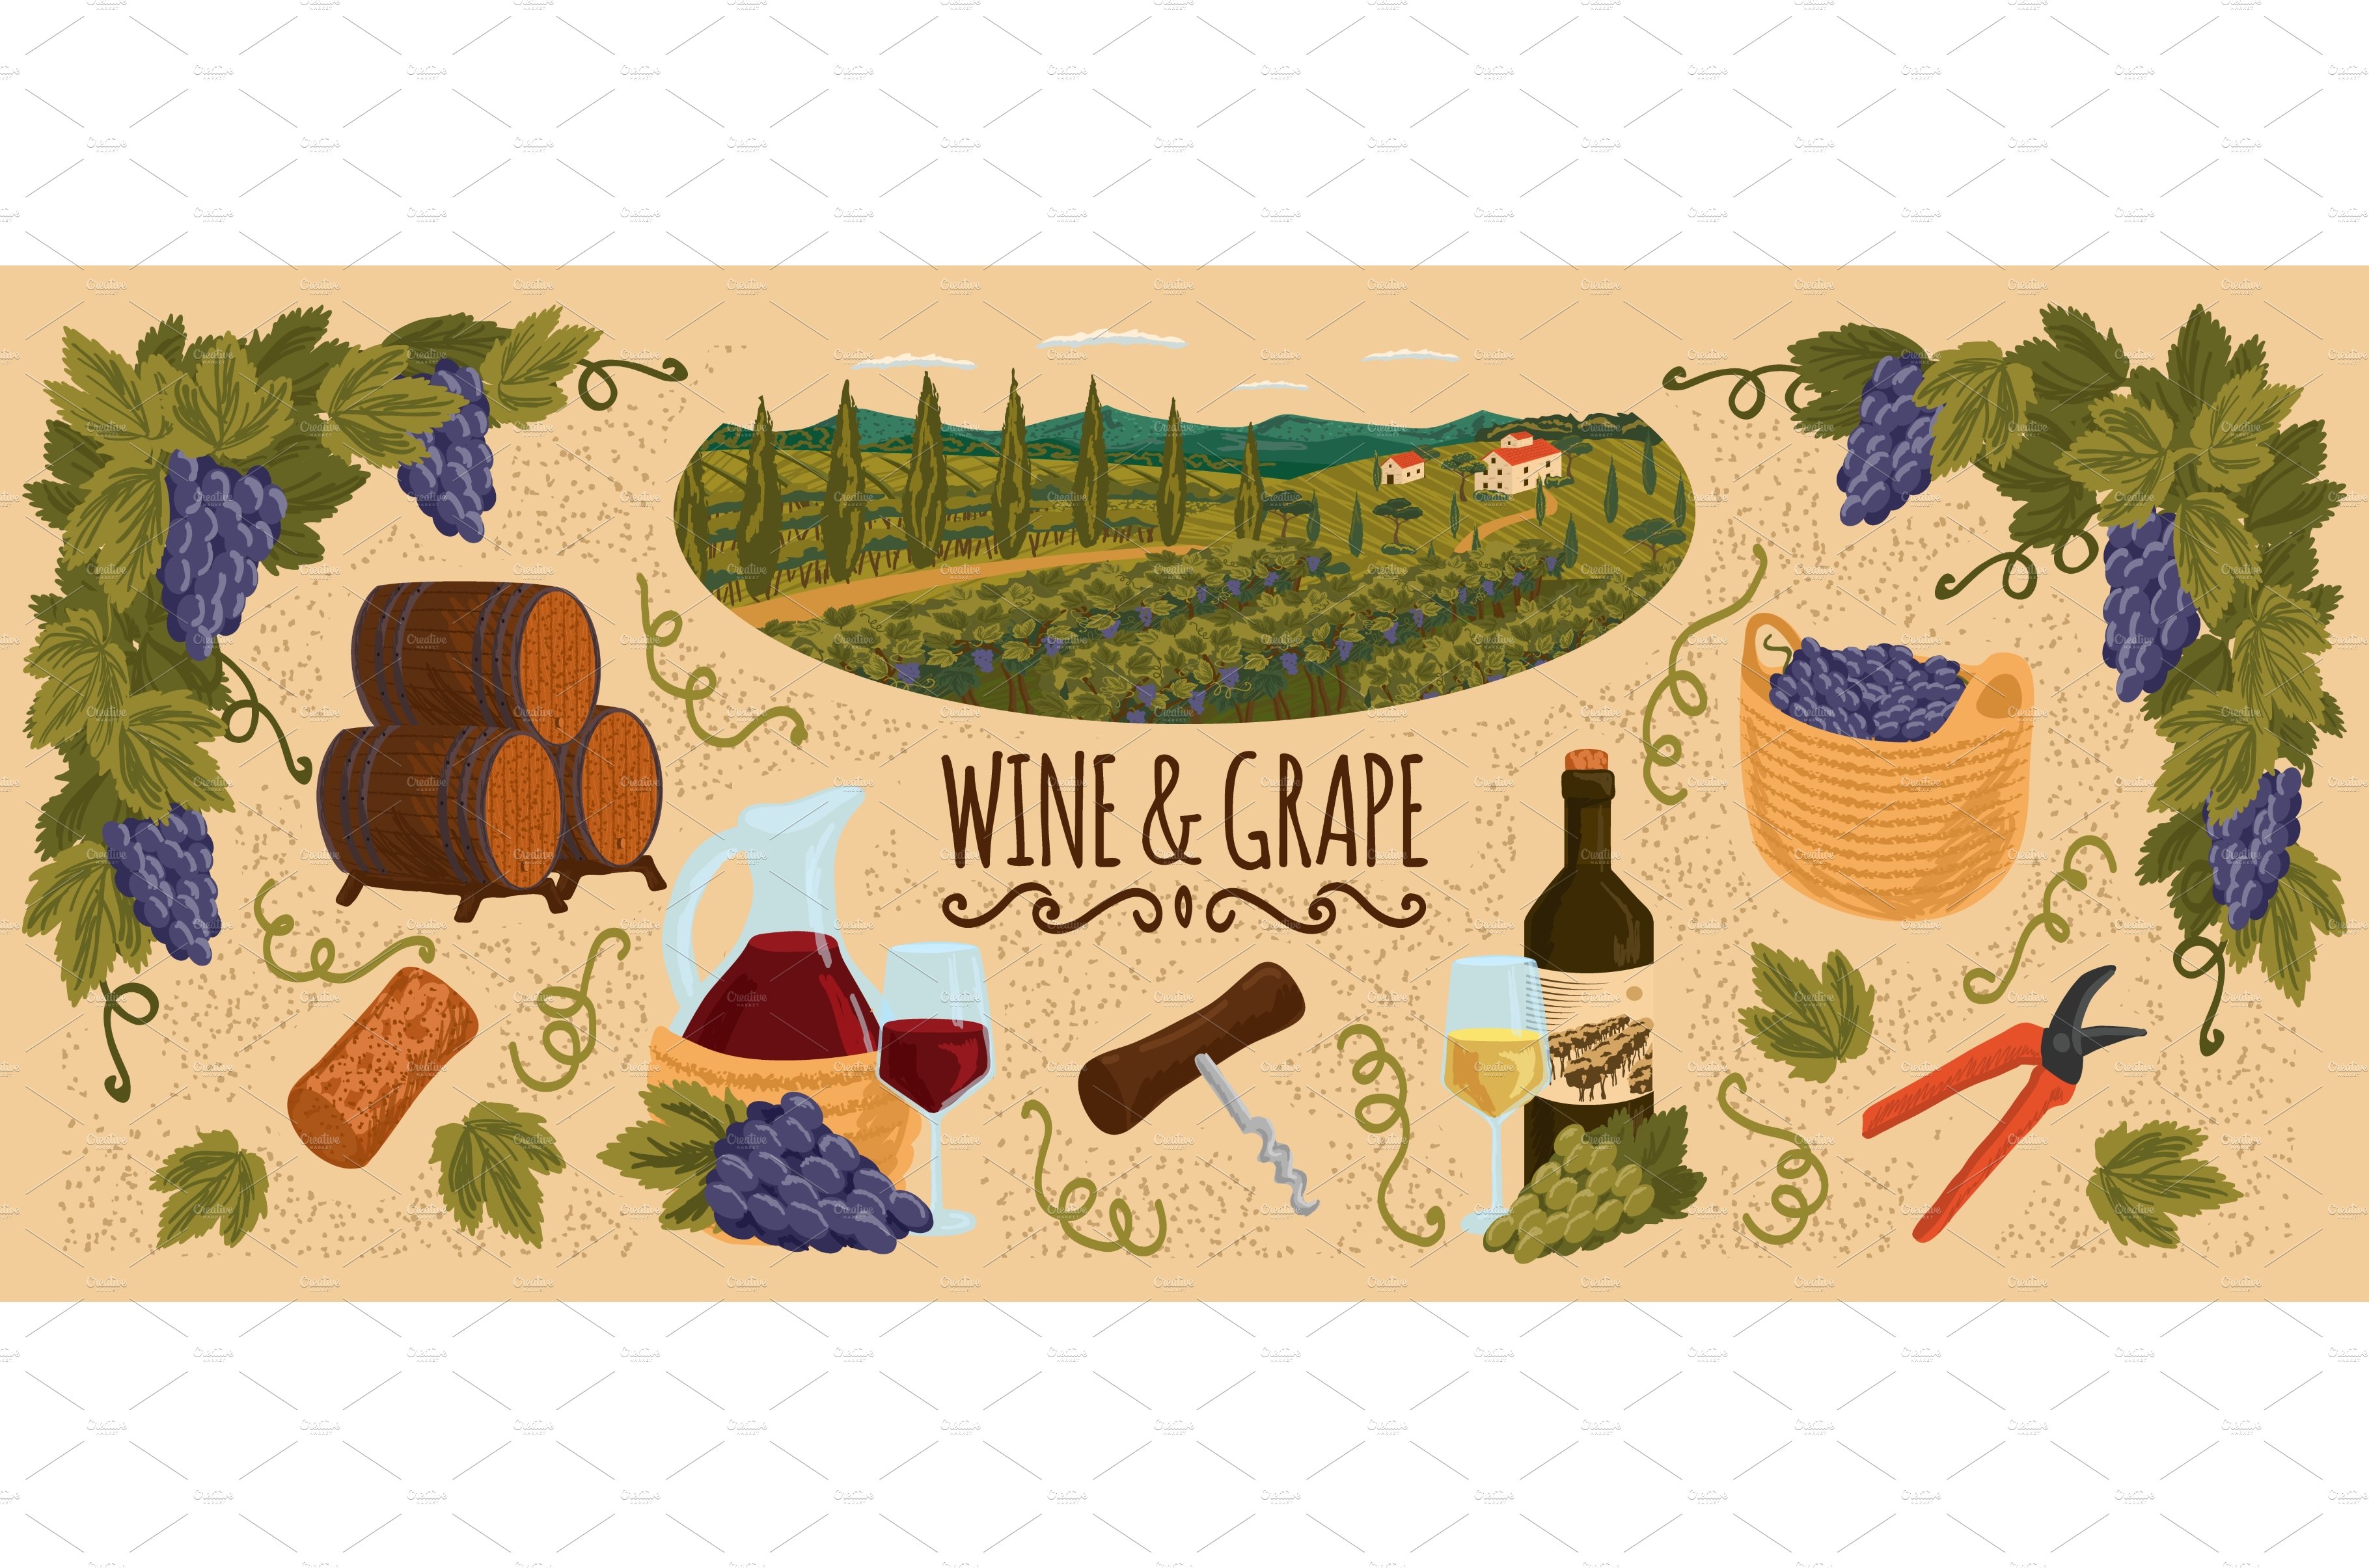 Winery vector set with vineyard cover image.